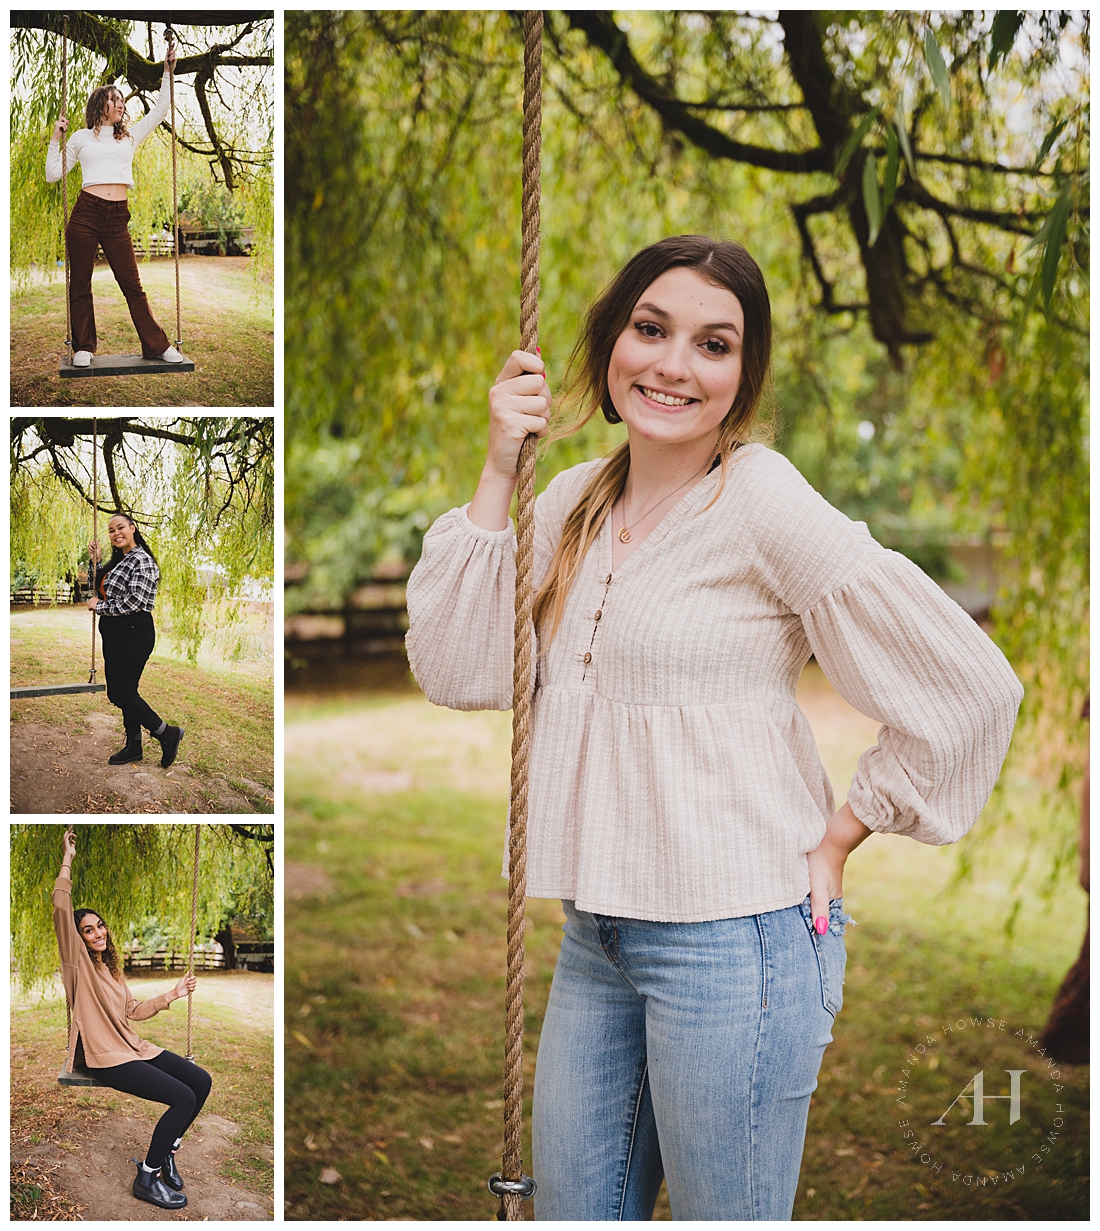 Fun Senior Portraits on a Tree Swing | AHP Model Team Portraits | Photographed by the Best Tacoma Senior Portrait Photographer Amanda Howse Photography 